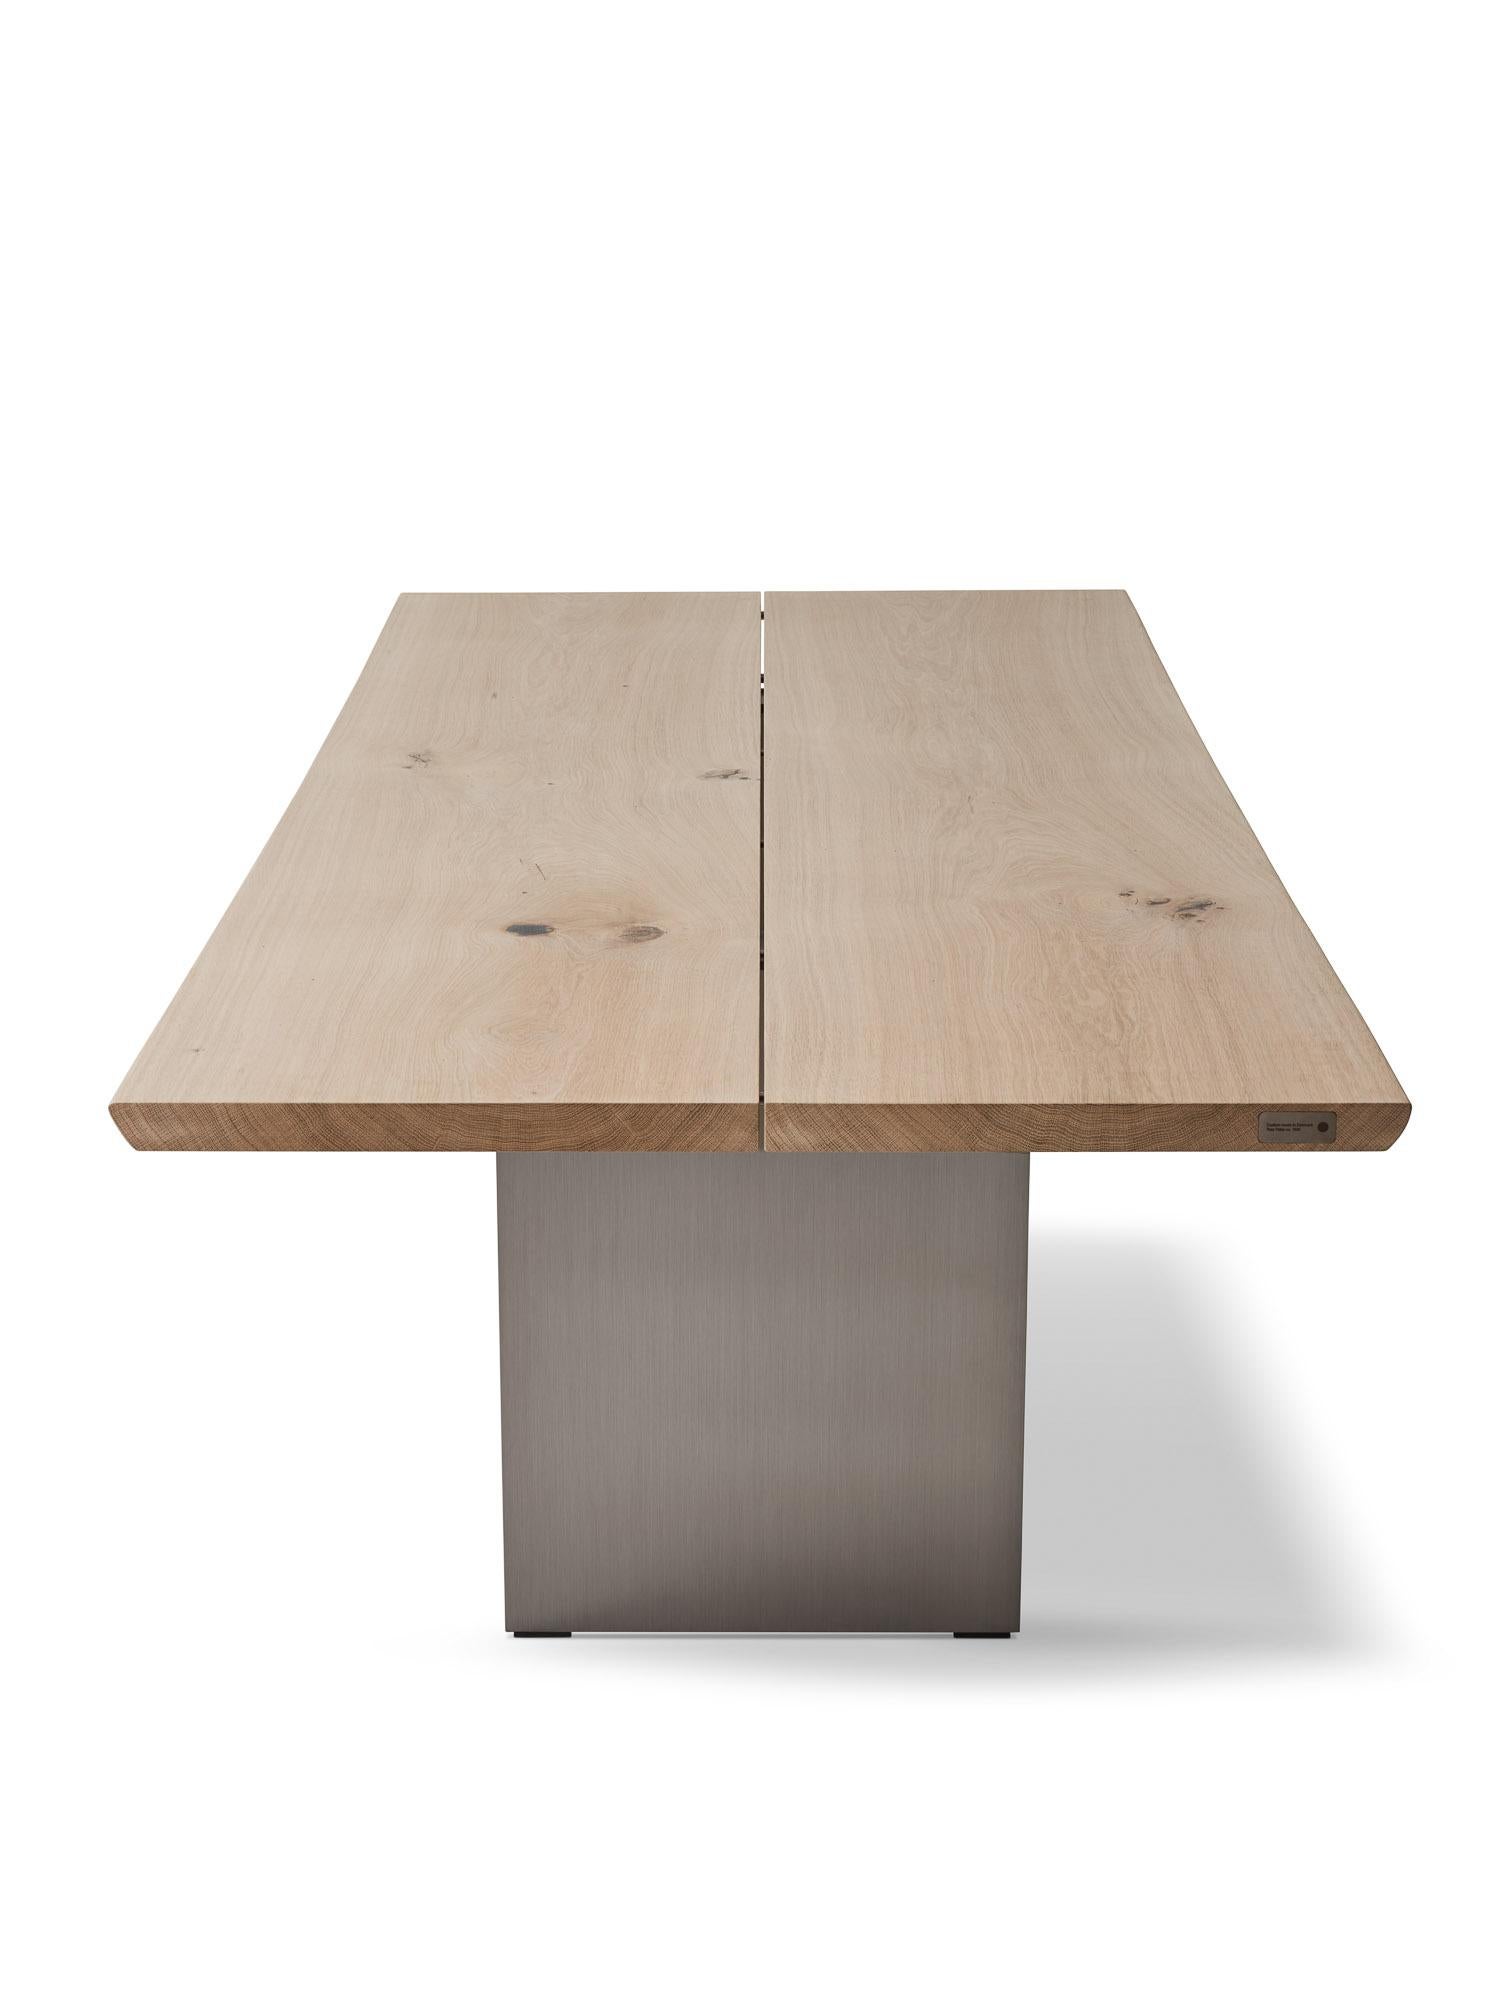 Tree dining table
Solid wood tabletop and steel legs

Table height: 72 or 74 cm
Tabletop dimension:
– 200 x 100 cm
– 240 x 100 cm
– 270 x 100 cm
– 300 x 100 cm
Table top thickness : 4 cm

Wood :
– Oak
– Smoked oak
– Walnut

Steel legs:
– Clear